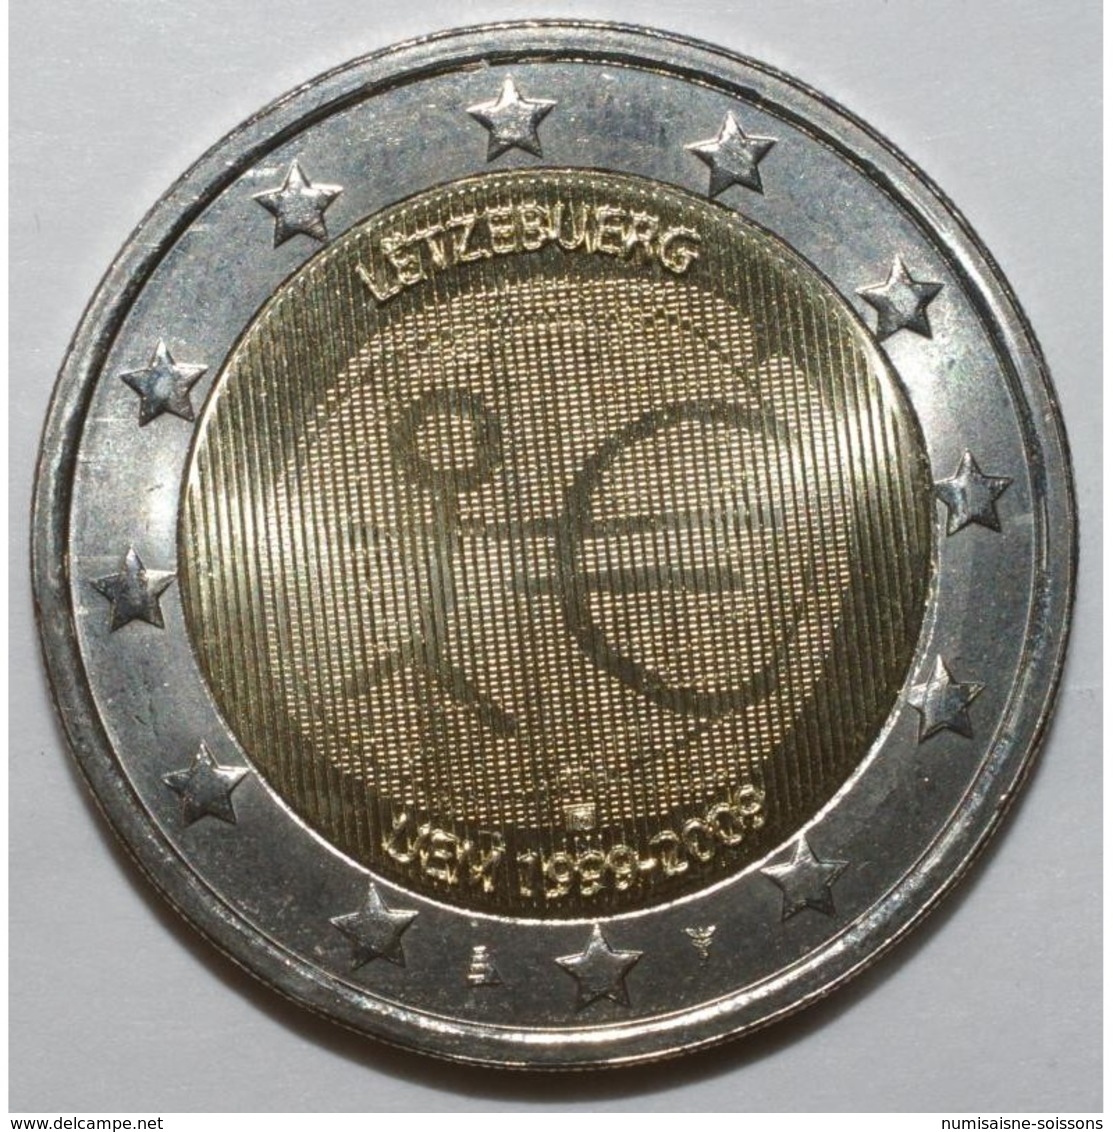 LUXEMBOURG - 2 EURO 2009 - EMU - SUP/FDC - - Luxembourg